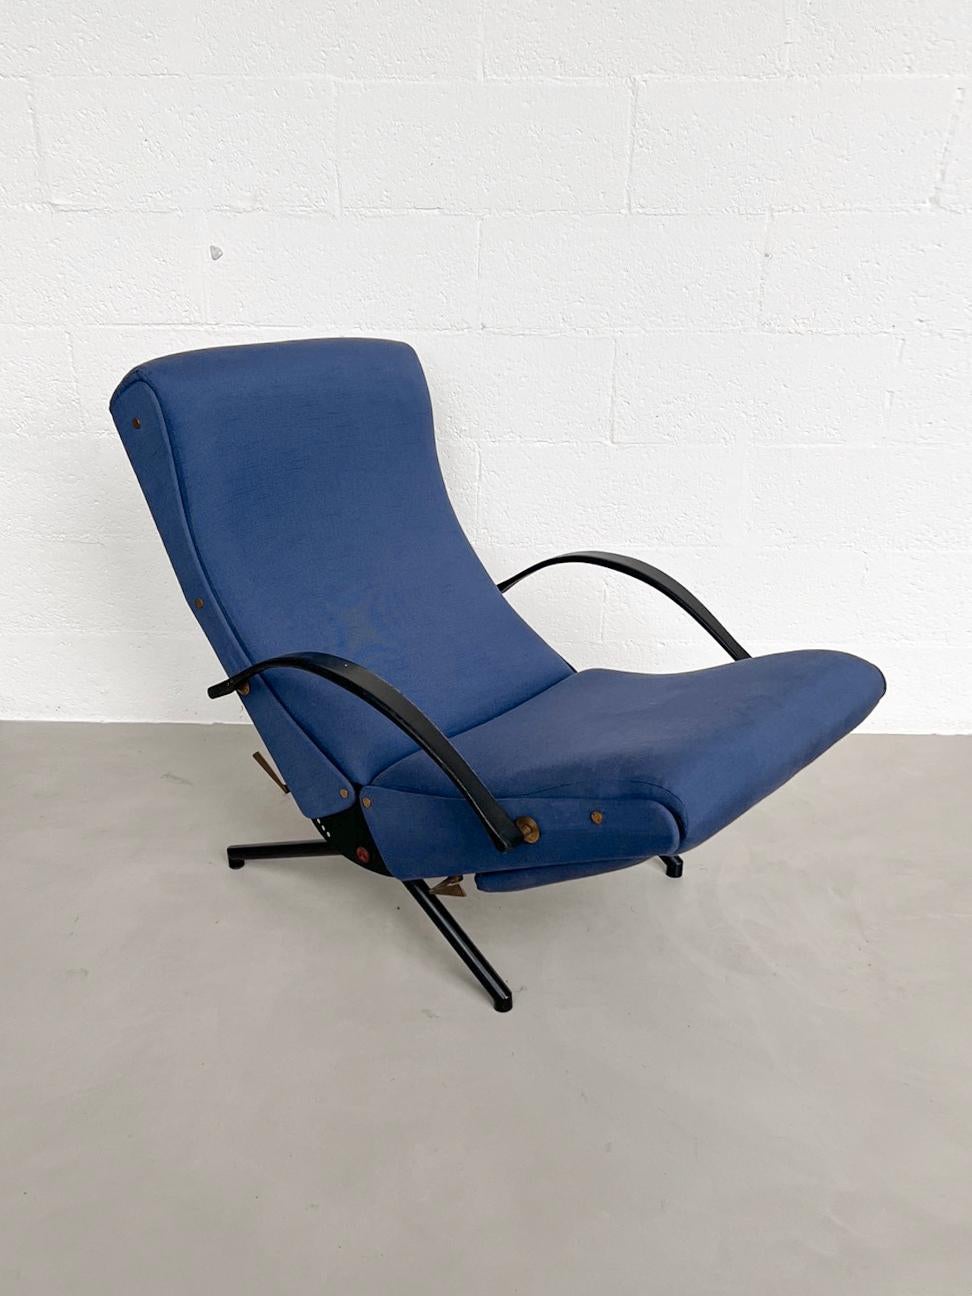 Borsani P40 Lounge Chair - Italian Collectible Furniture - Mid Century Armchair

Designed in 1956 by Italian architect Osvaldo Borsani, the P40 lounge chair - where 